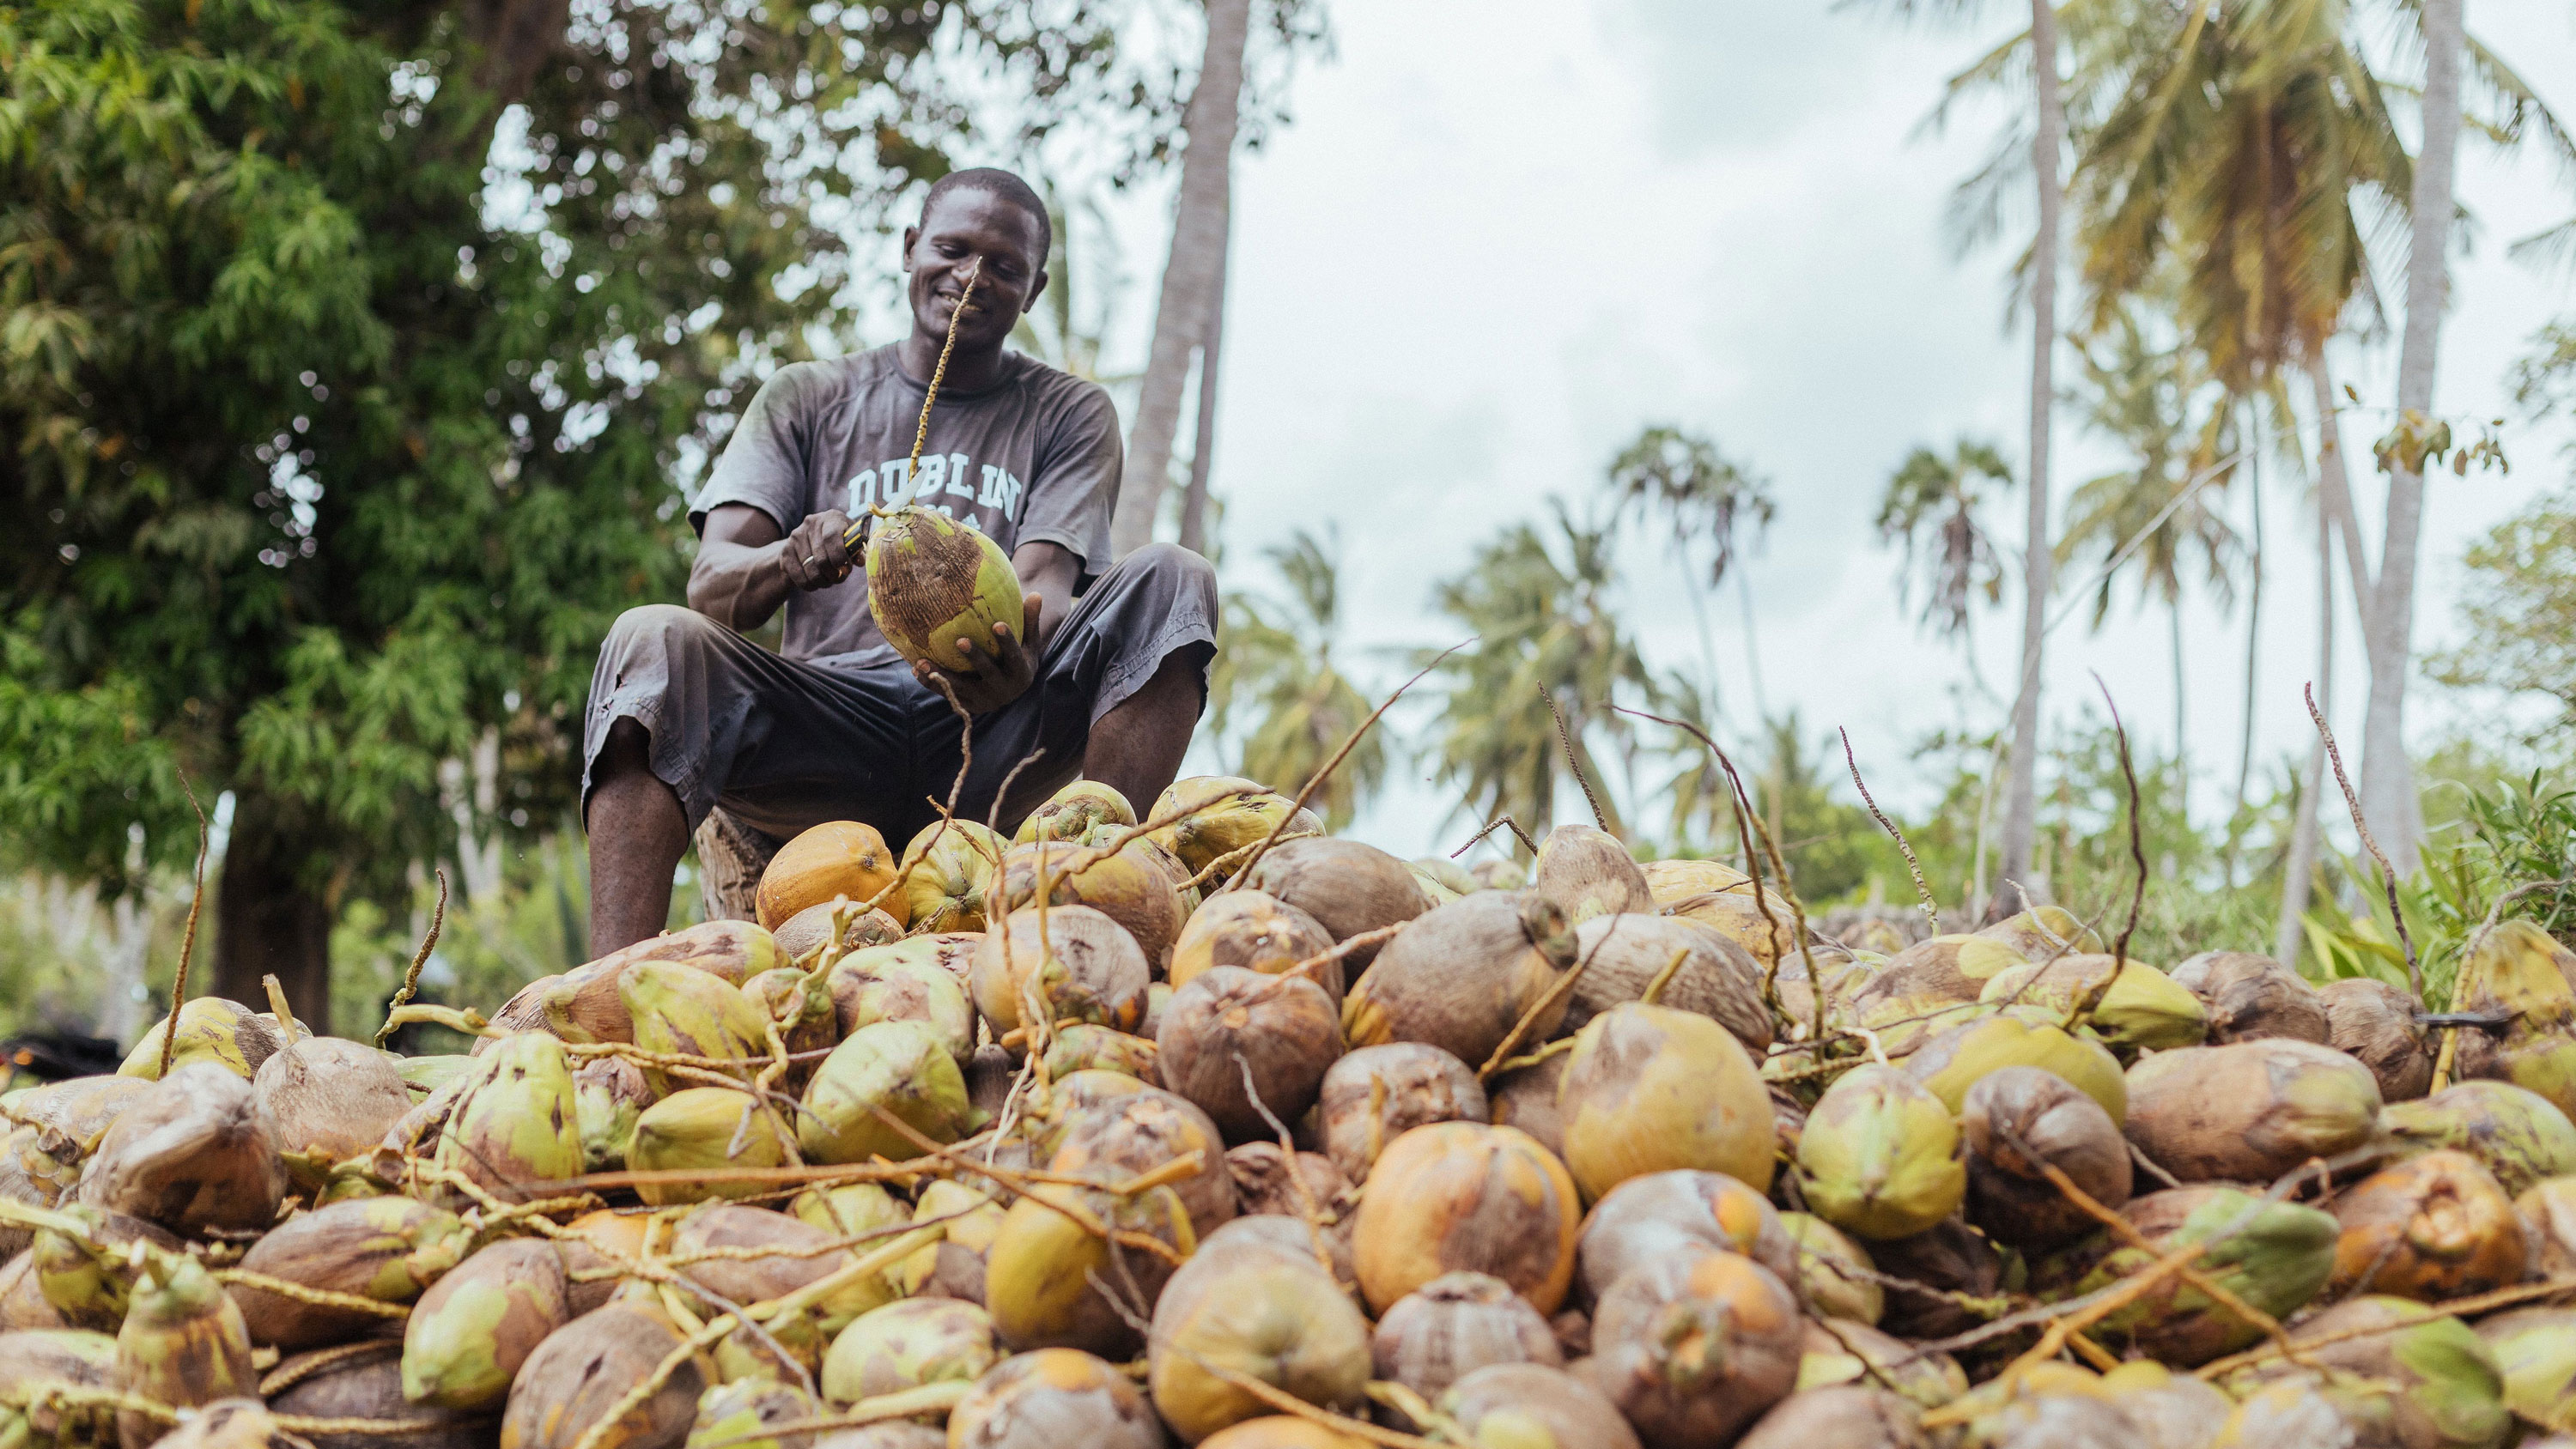 Man carving open cocnut whil siting on pile of coconuts